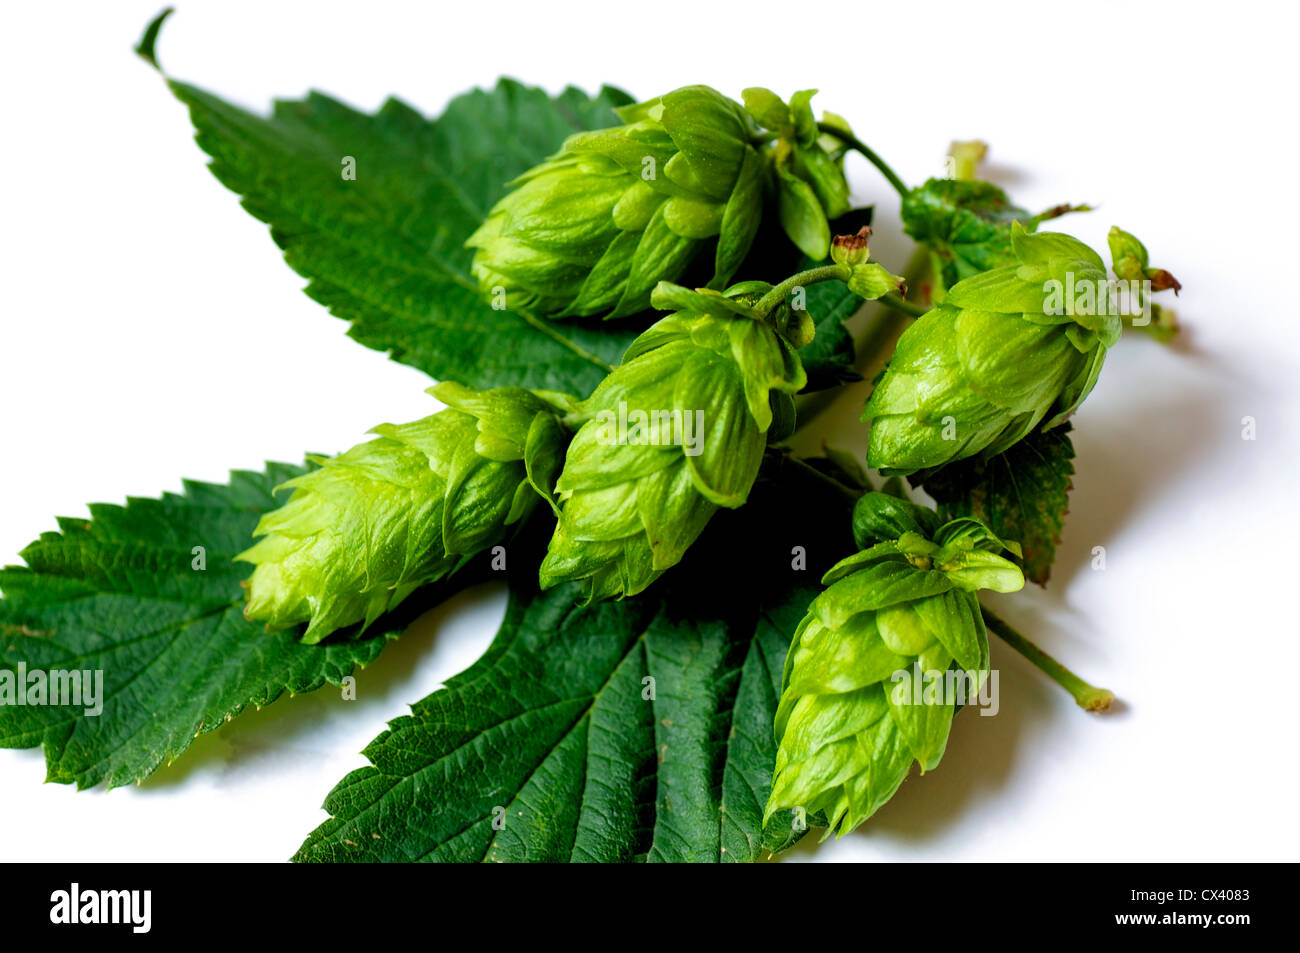 Closeup of Hops umbels on a hops leaf, Hops is one of the most important ingredients of beer. Stock Photo